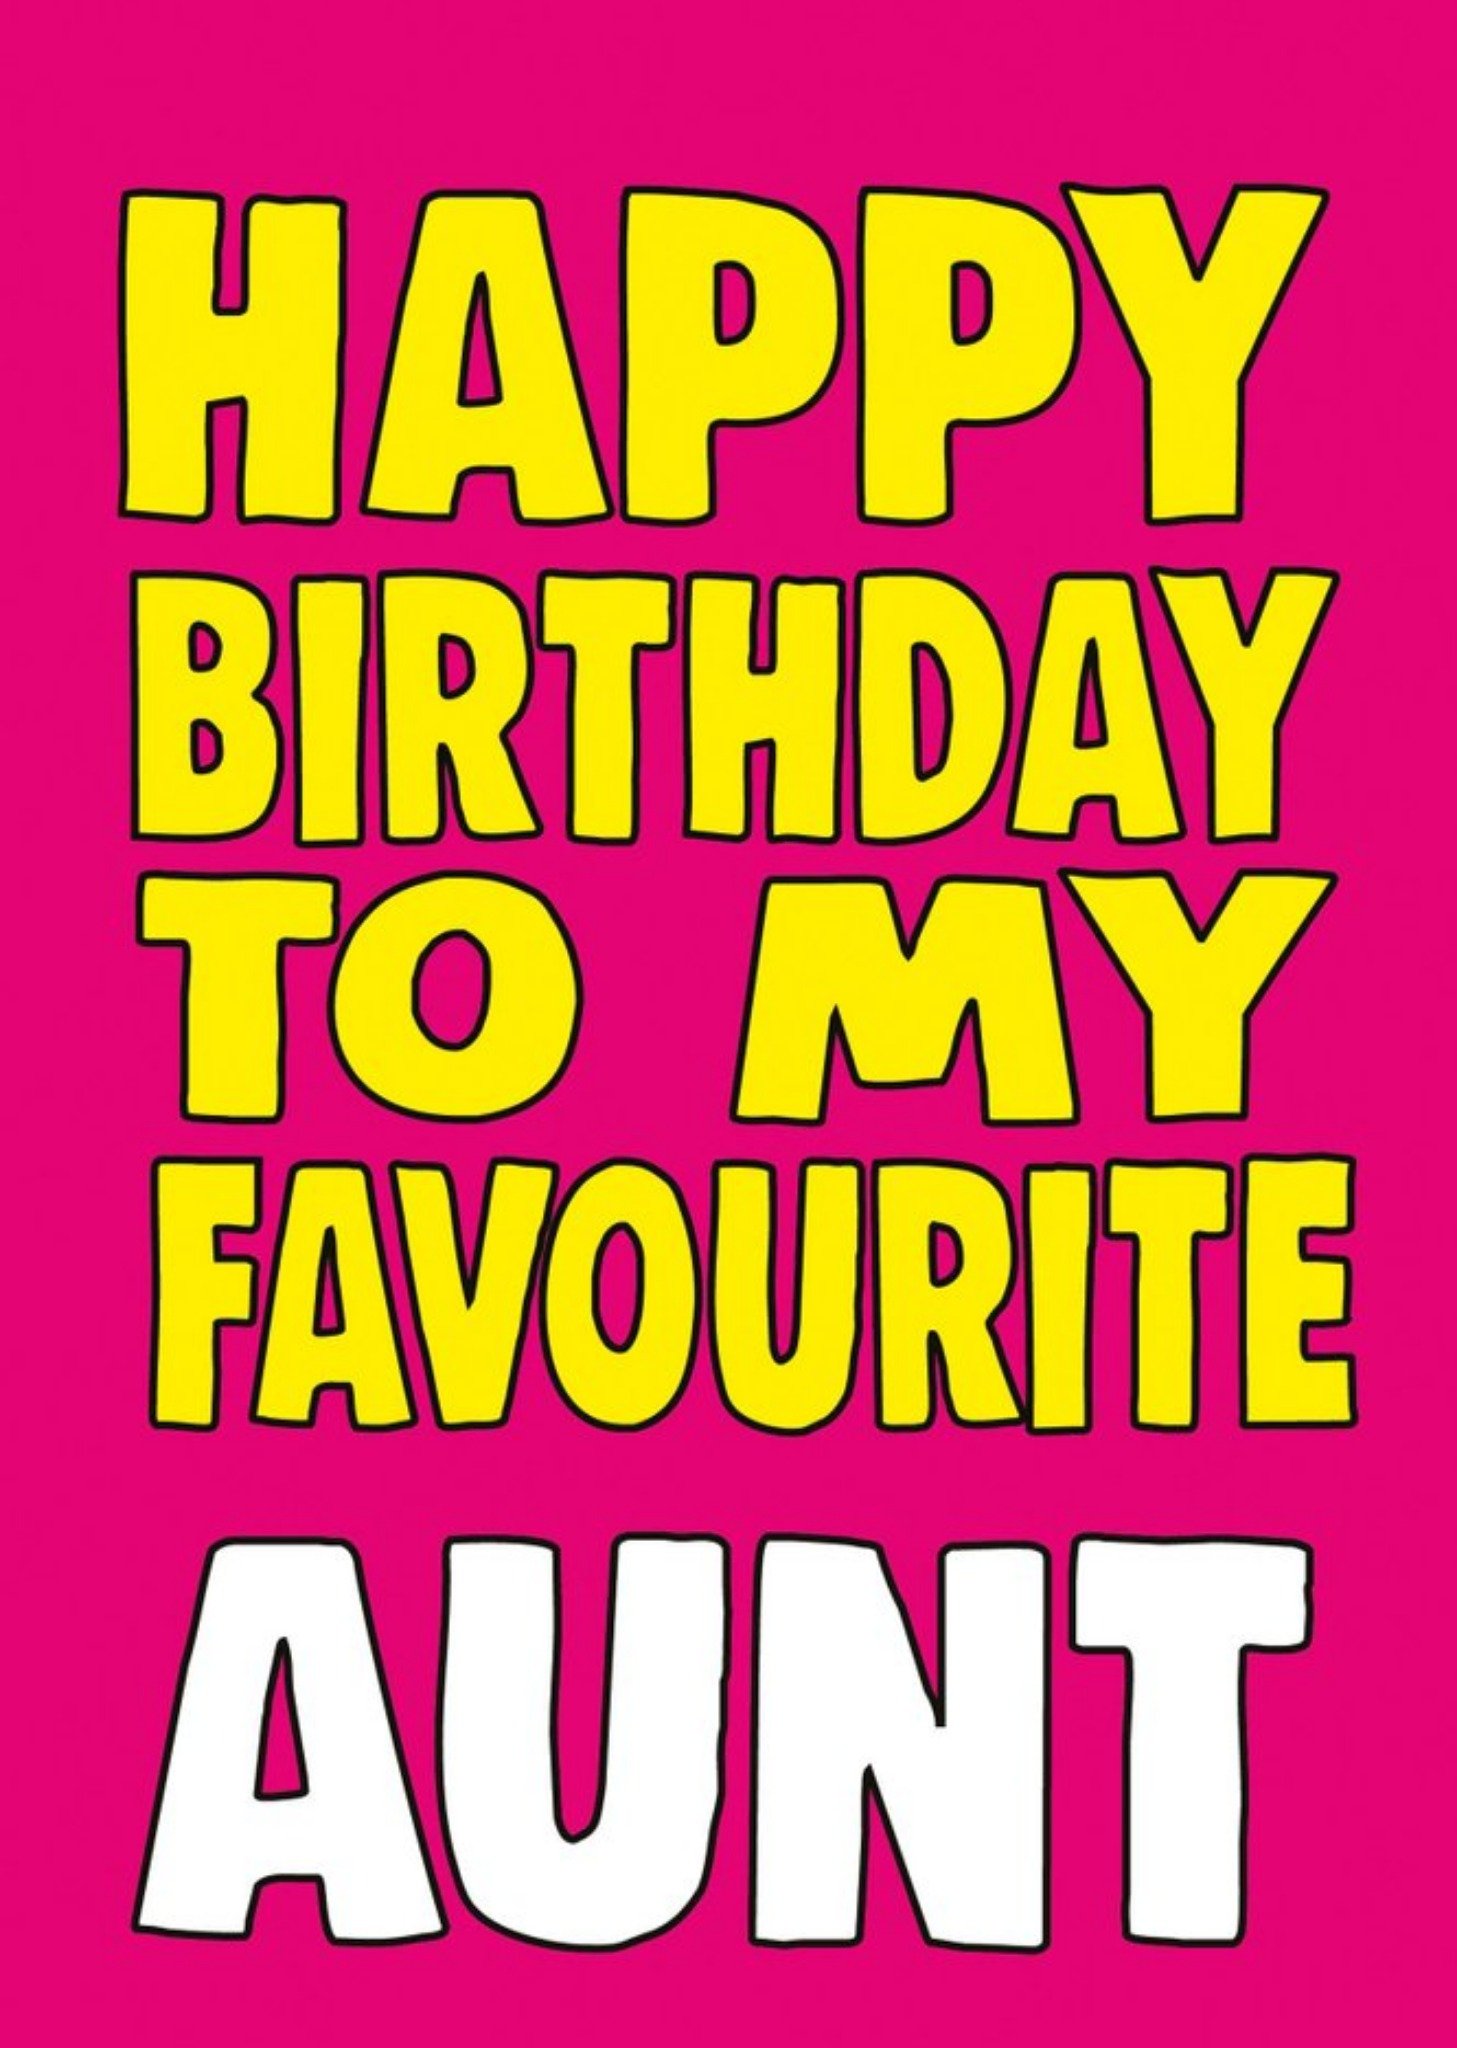 Moonpig Bright Bold Typography Favourite Aunt Birthday Card, Large